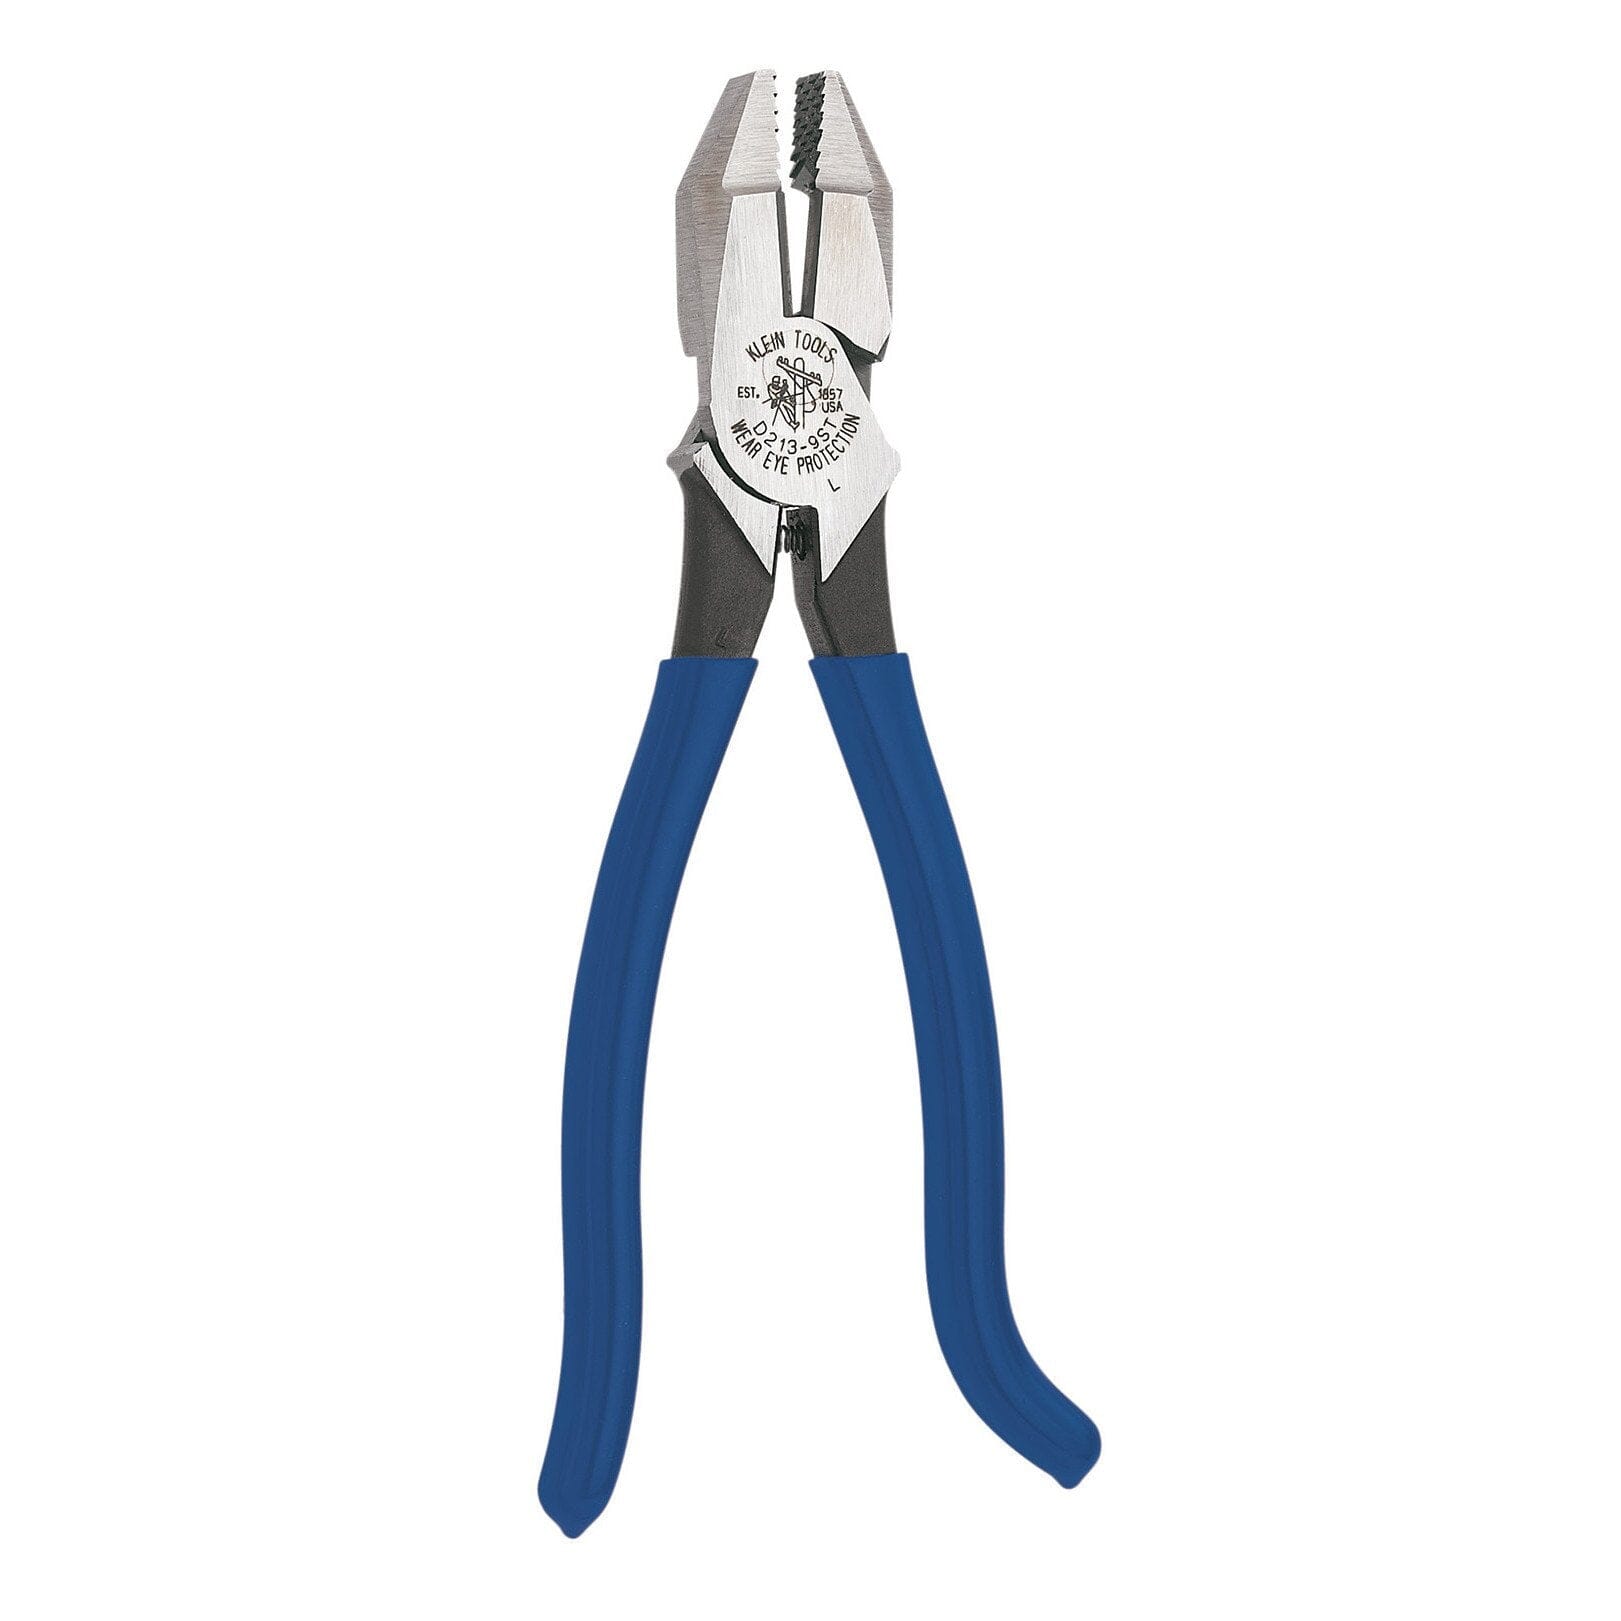 Klein Tools D213-9ST - High Leverage Ironworker's Pliers